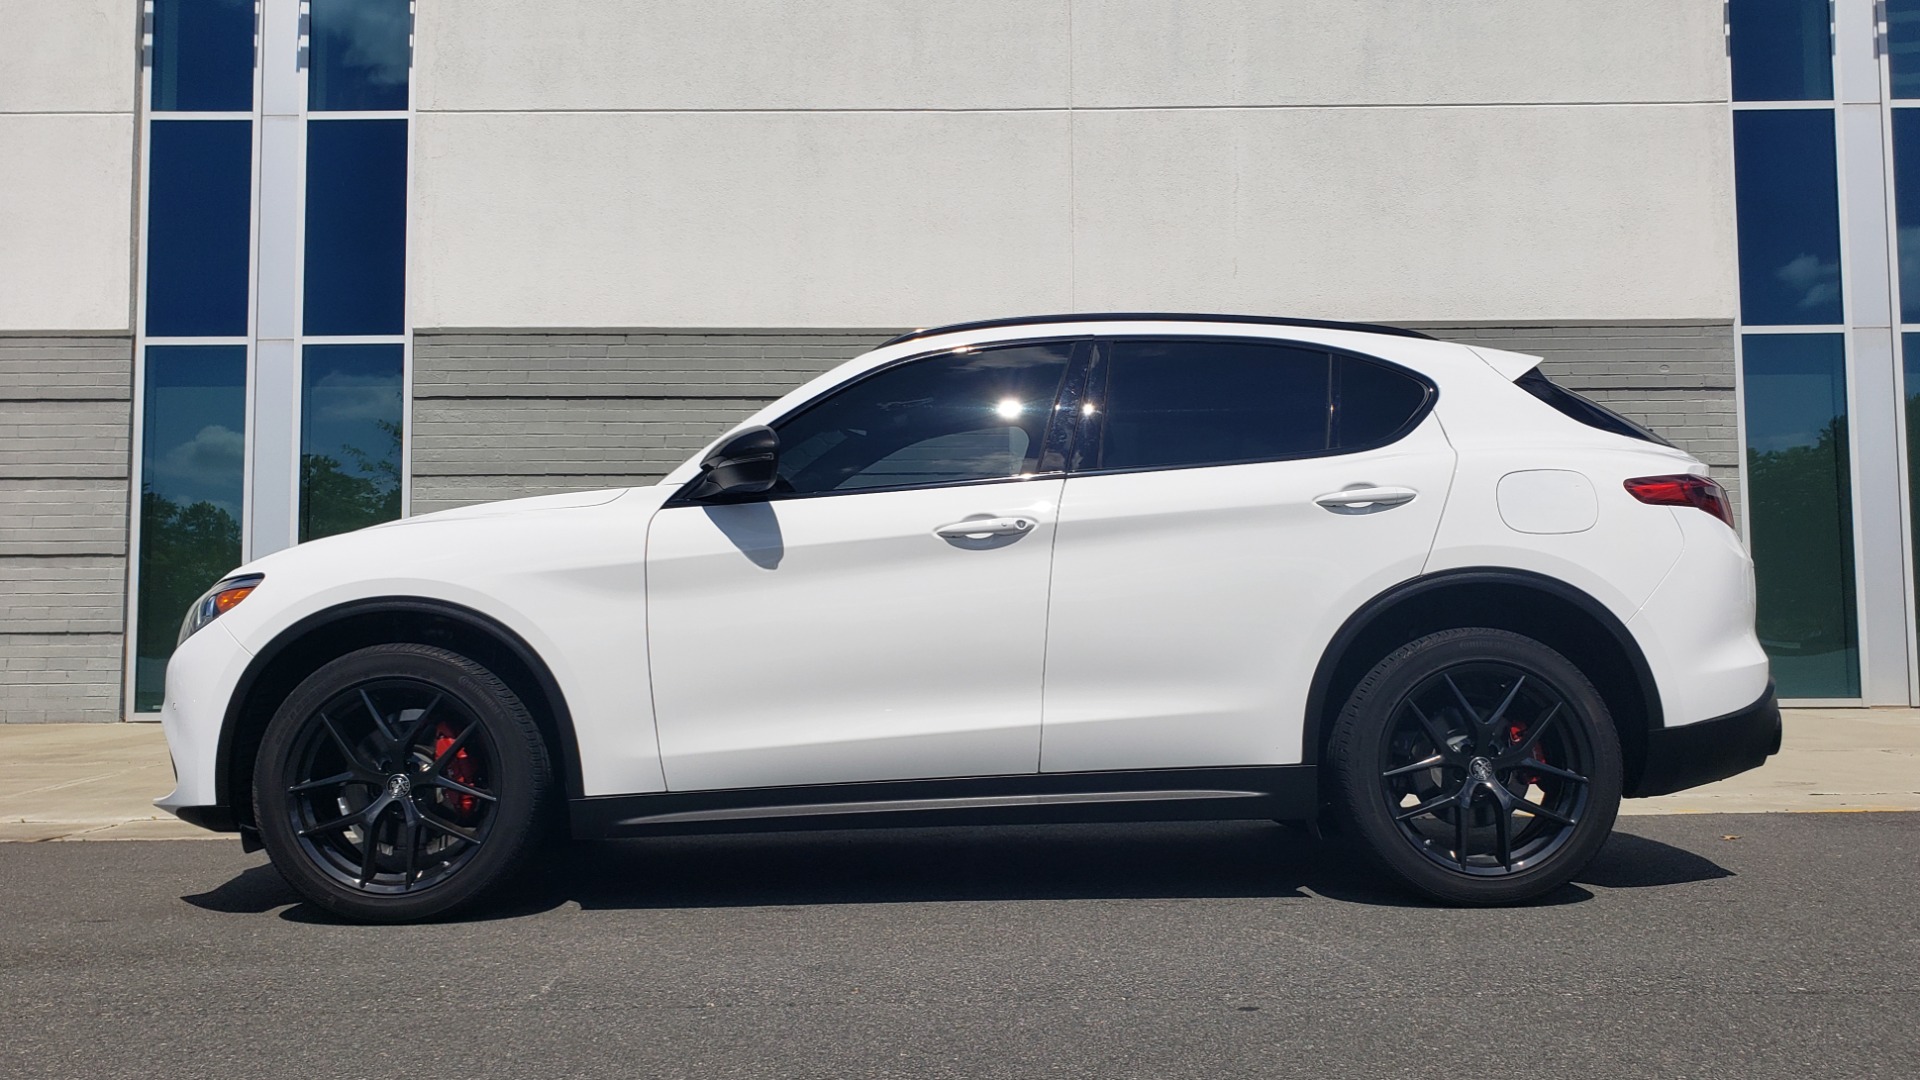 Used 2019 Alfa Romeo STELVIO TI SPORT AWD / 2.0L TURBO / 8-SPD AUTO / DRVR ASST / REARVIEW for sale Sold at Formula Imports in Charlotte NC 28227 8